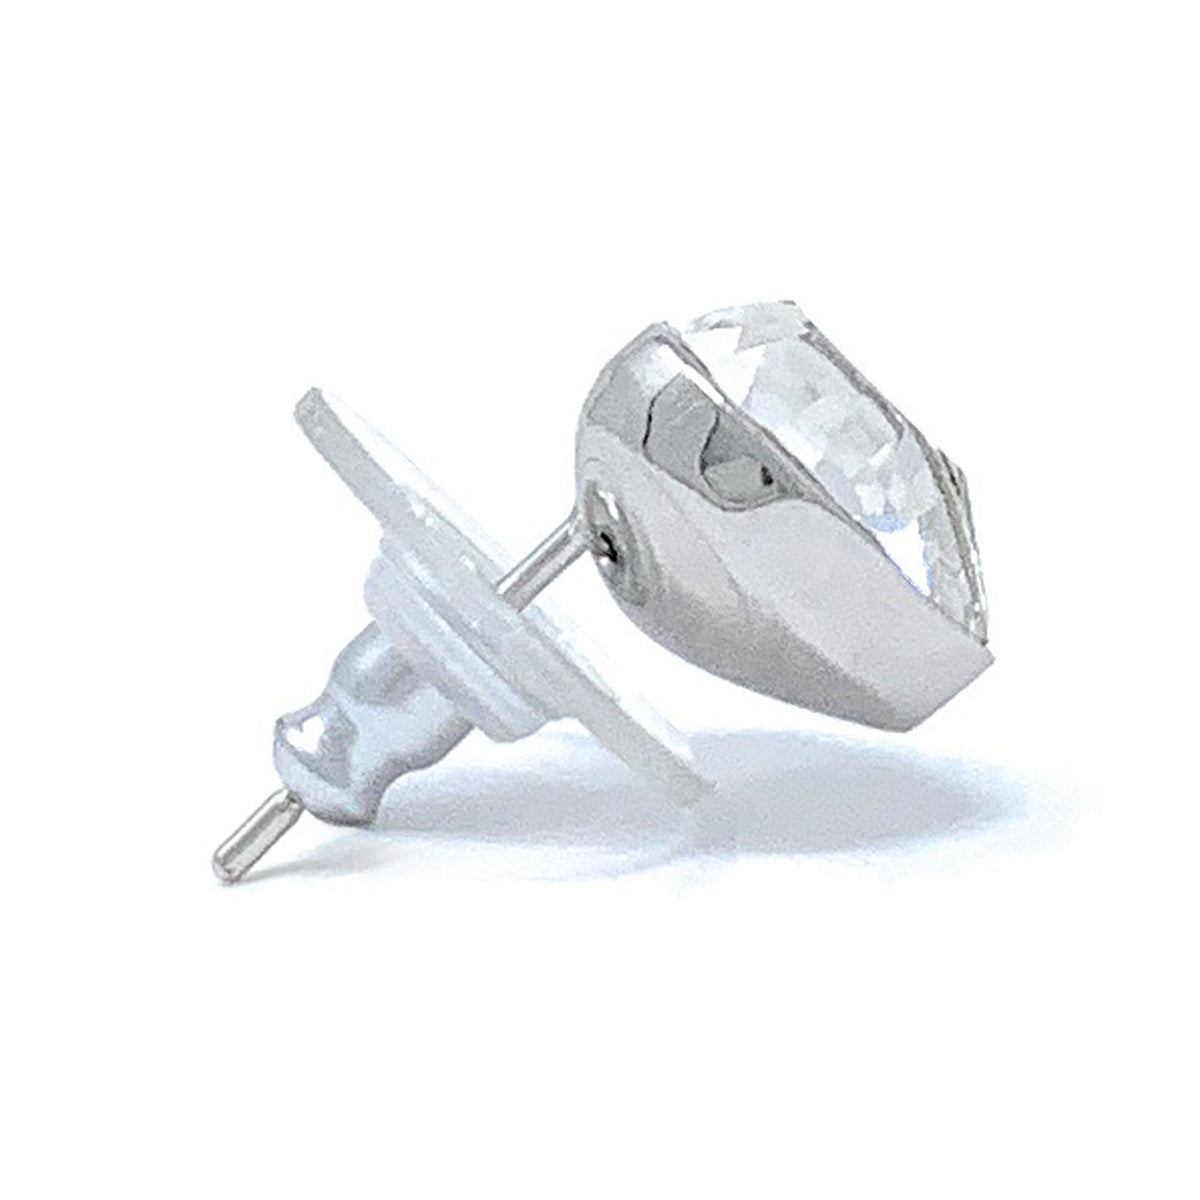 Lucia Stud Earrings with White Clear Heart Crystals from Swarovski Silver Toned Rhodium Plated - Ed Heart